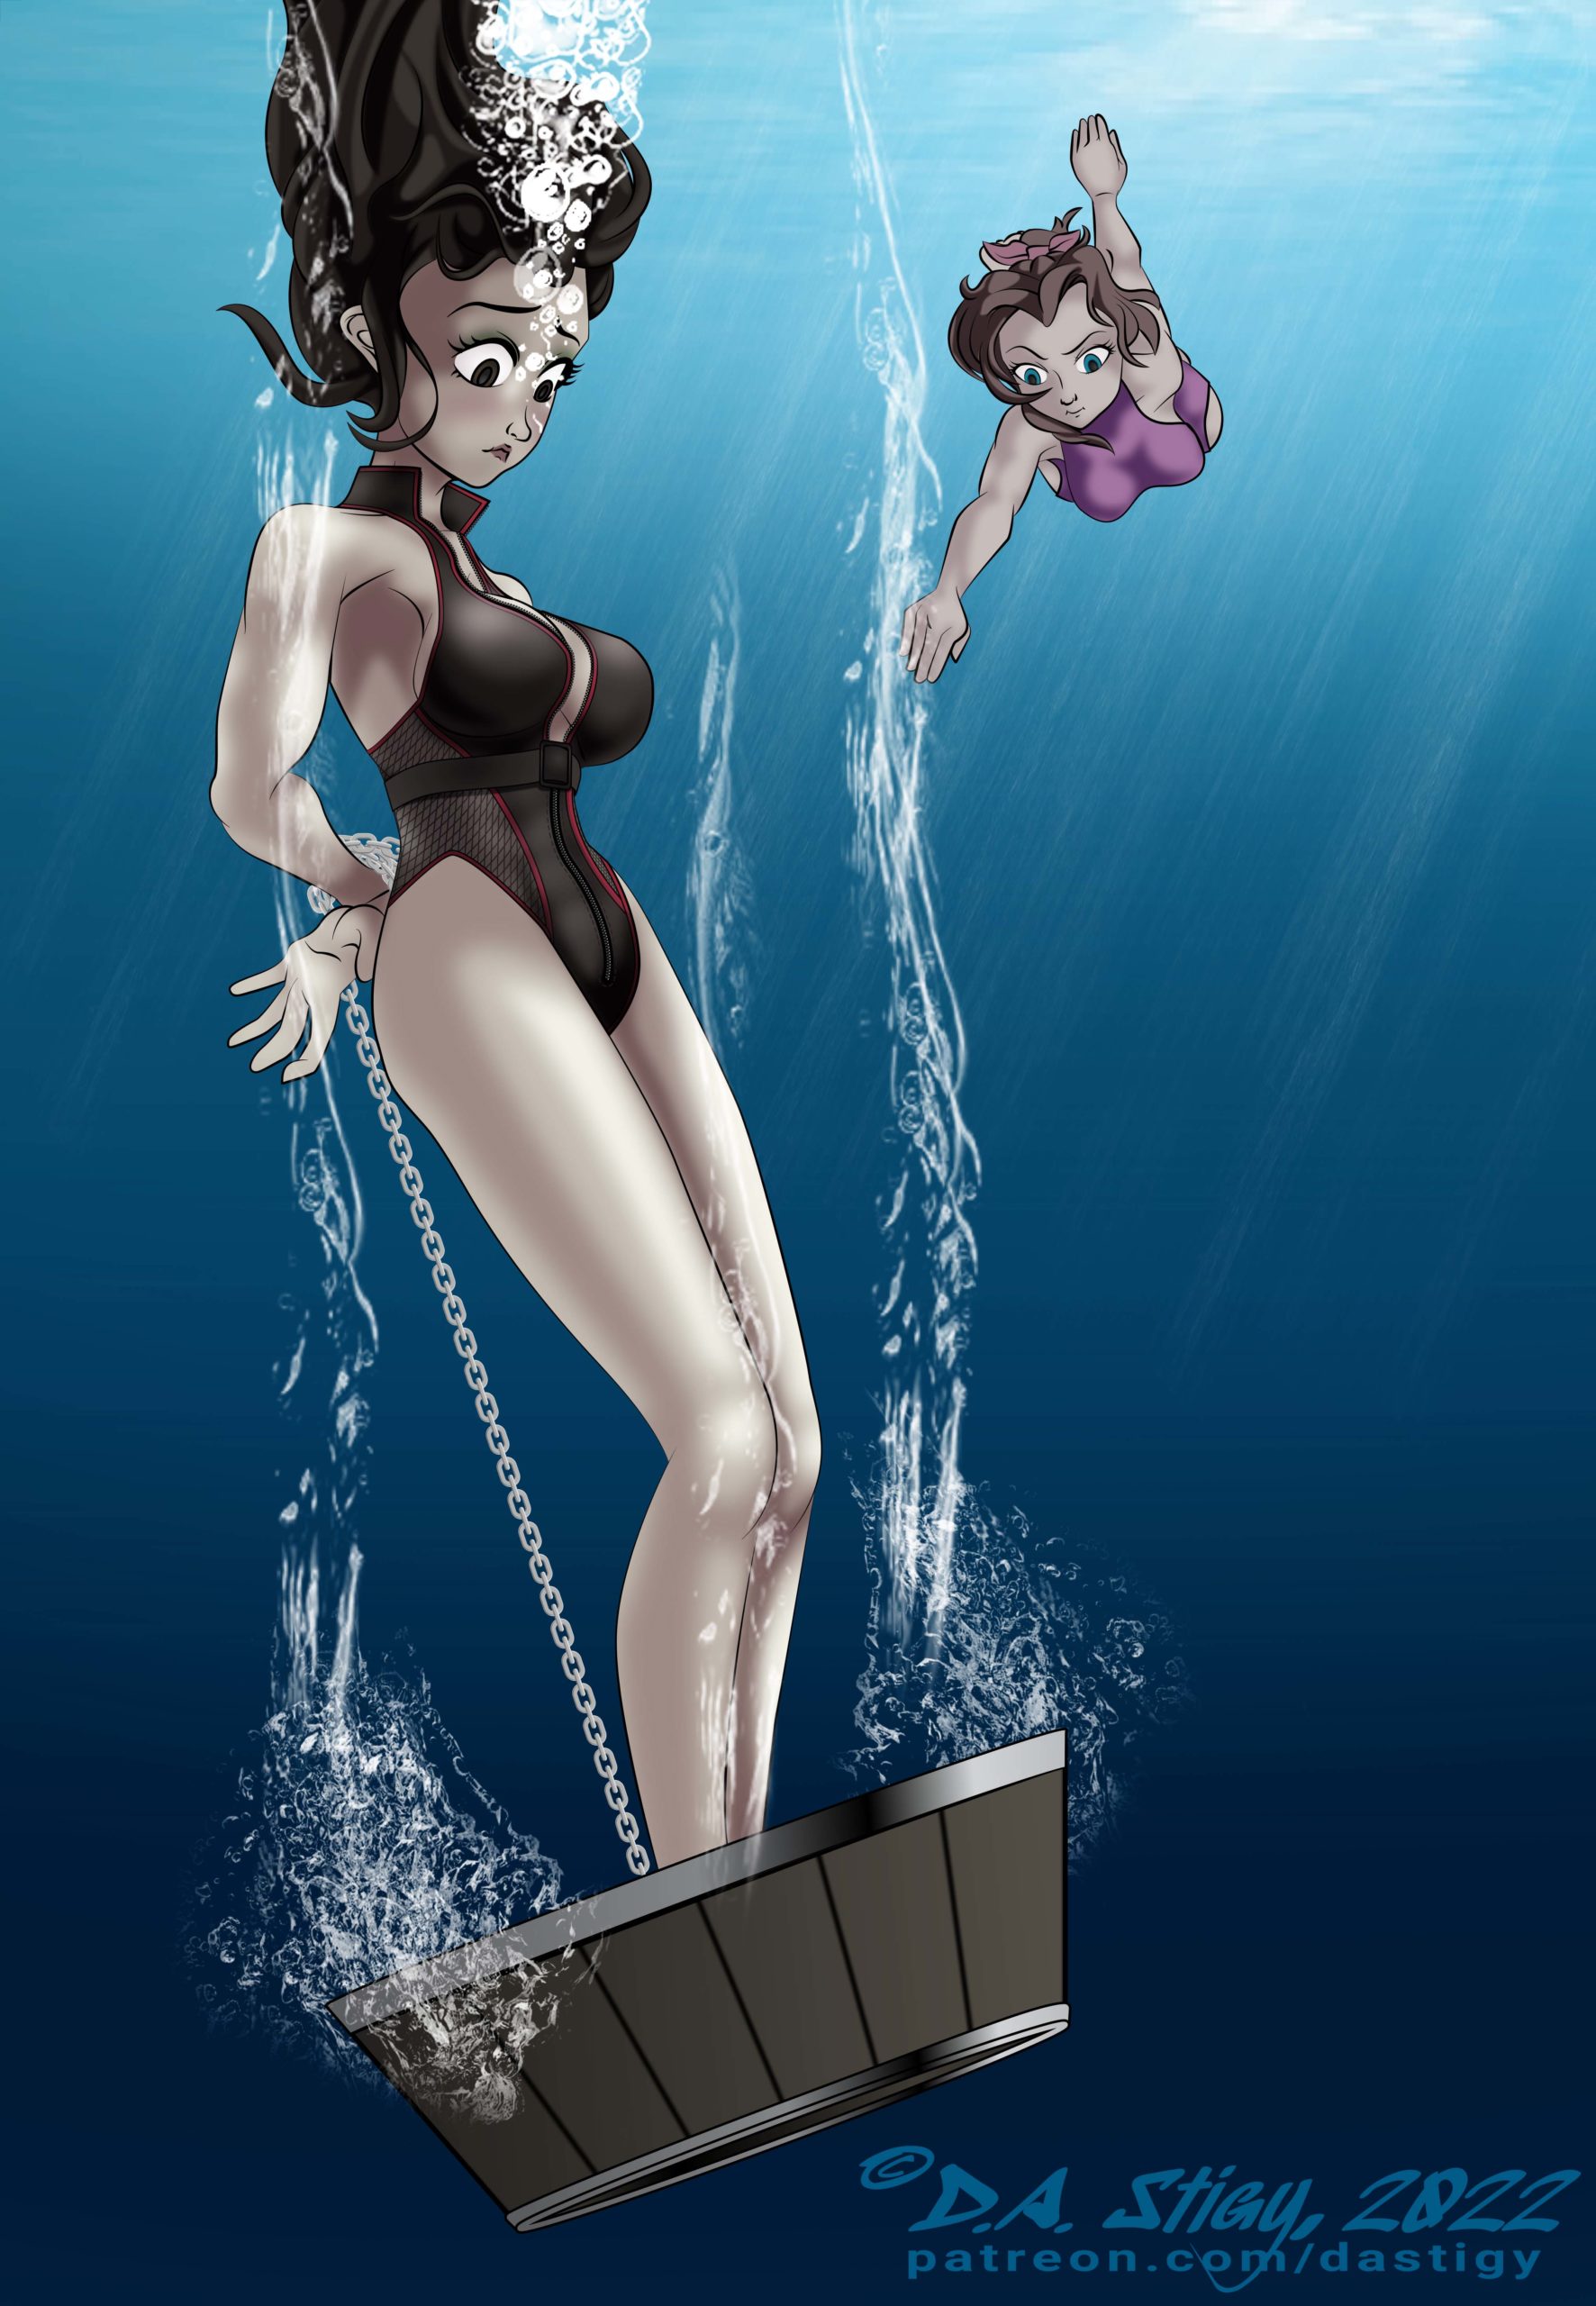 Tifa, feet chained to a heavy barrel is sinking fast, Aeris swims to her rescue.